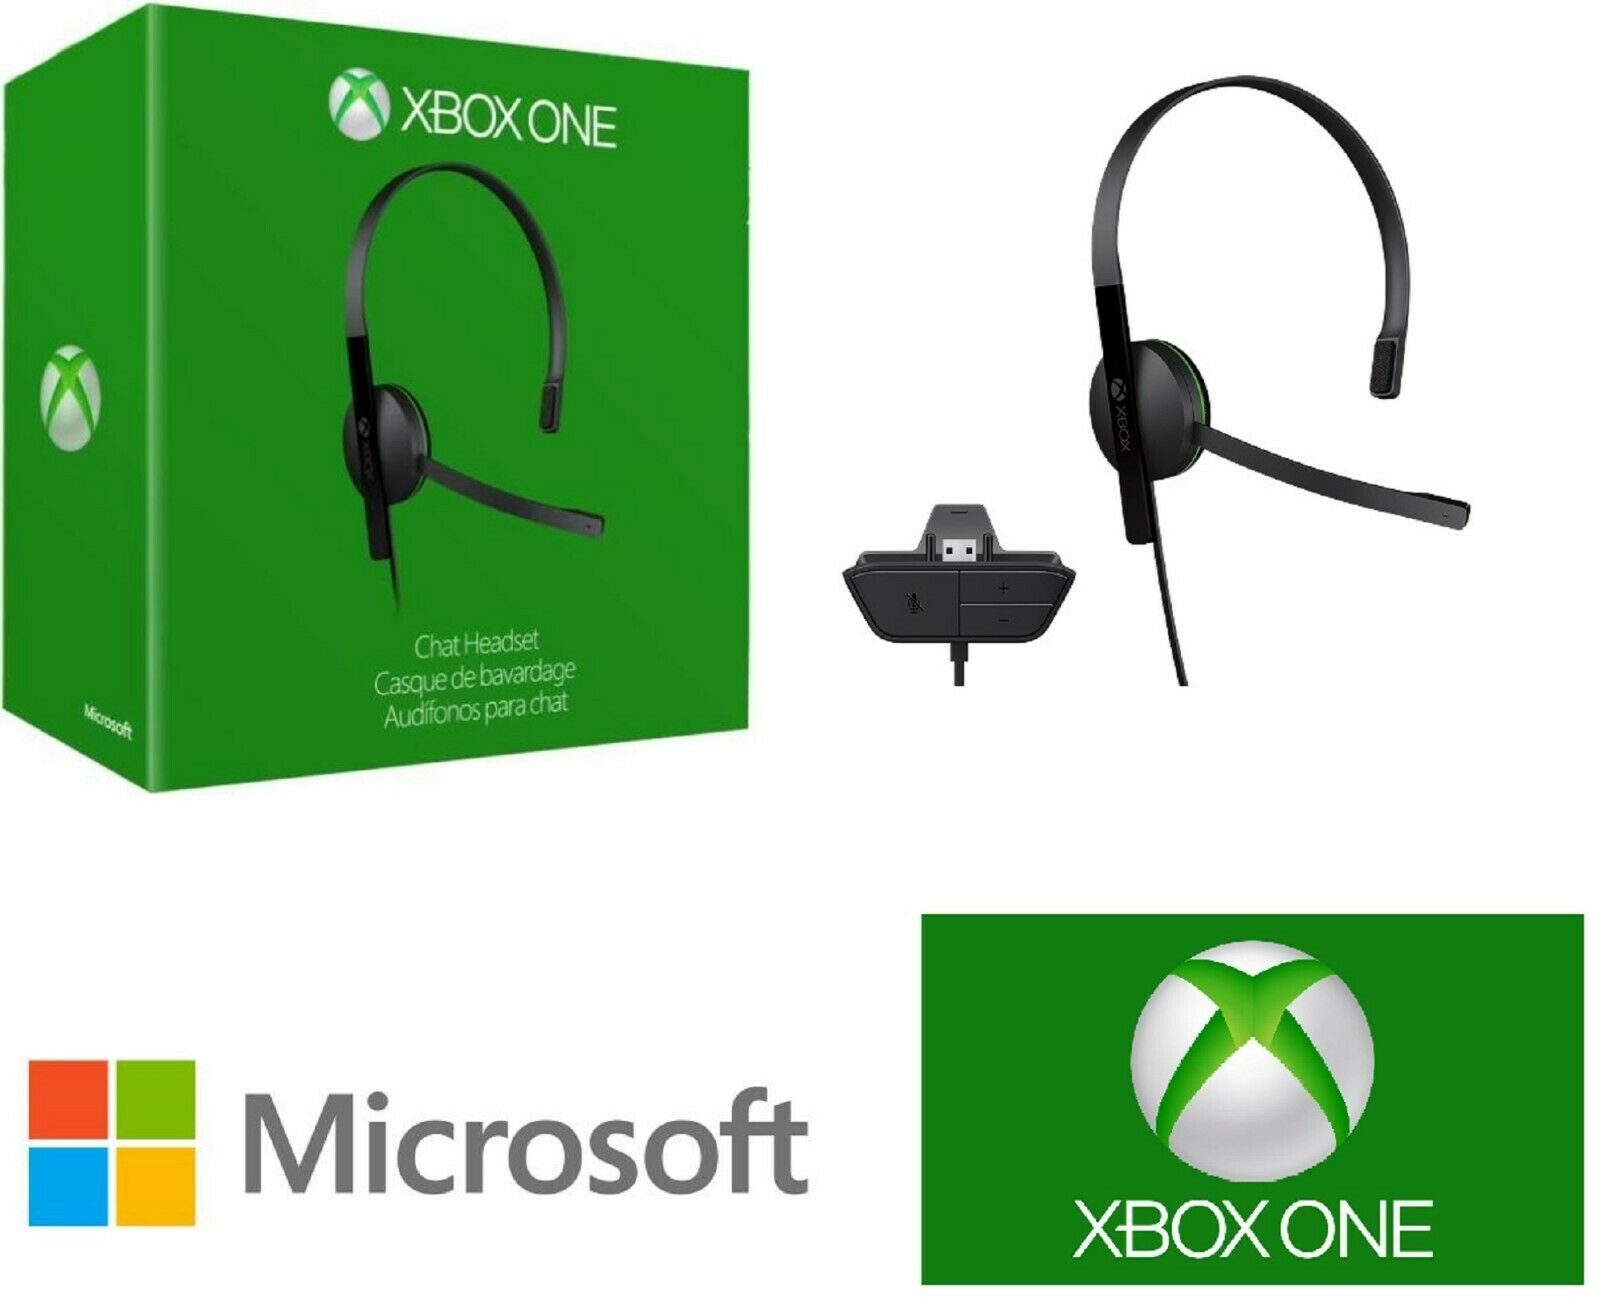 100% Official Genuine Microsoft Xbox One Chat Headset